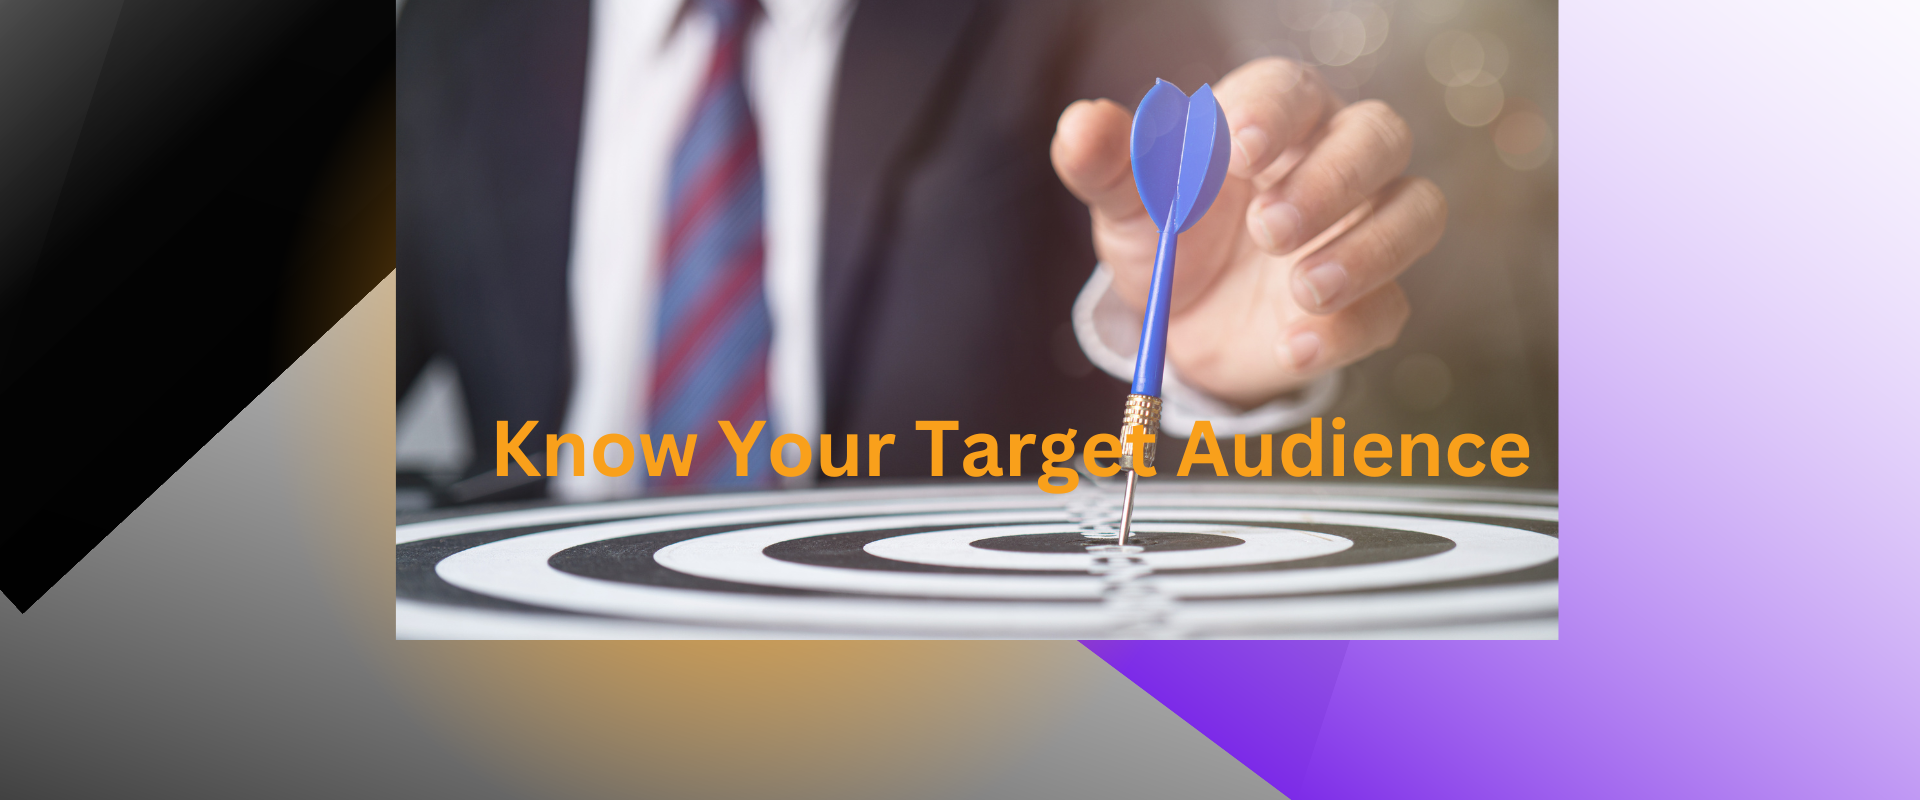 Know-Your-Target-Audience